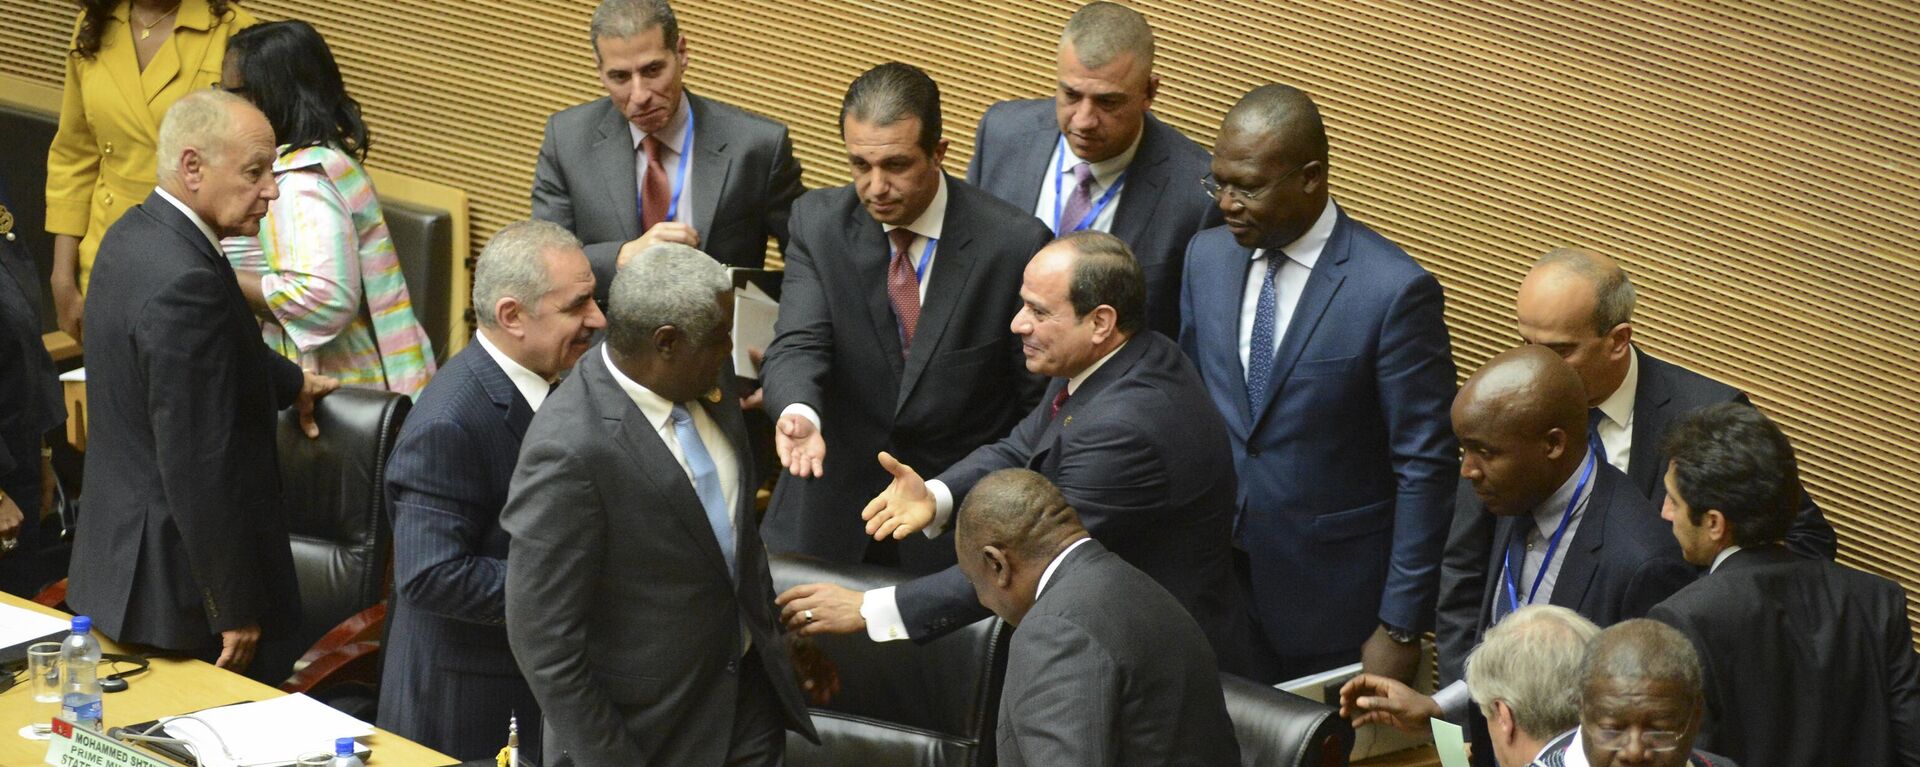 Egypt's President Abdel-Fattah el-Sissi, center, the outgoing Chairman of the African Union (AU), is greeted at opening session of the 33rd AU Summit where he was to hand over the chairmanship to South Africa's President Cyril Ramaphosa, at the AU headquarters in Addis Ababa, Ethiopia Sunday, Feb. 9, 2020.  - Sputnik Africa, 1920, 19.05.2023